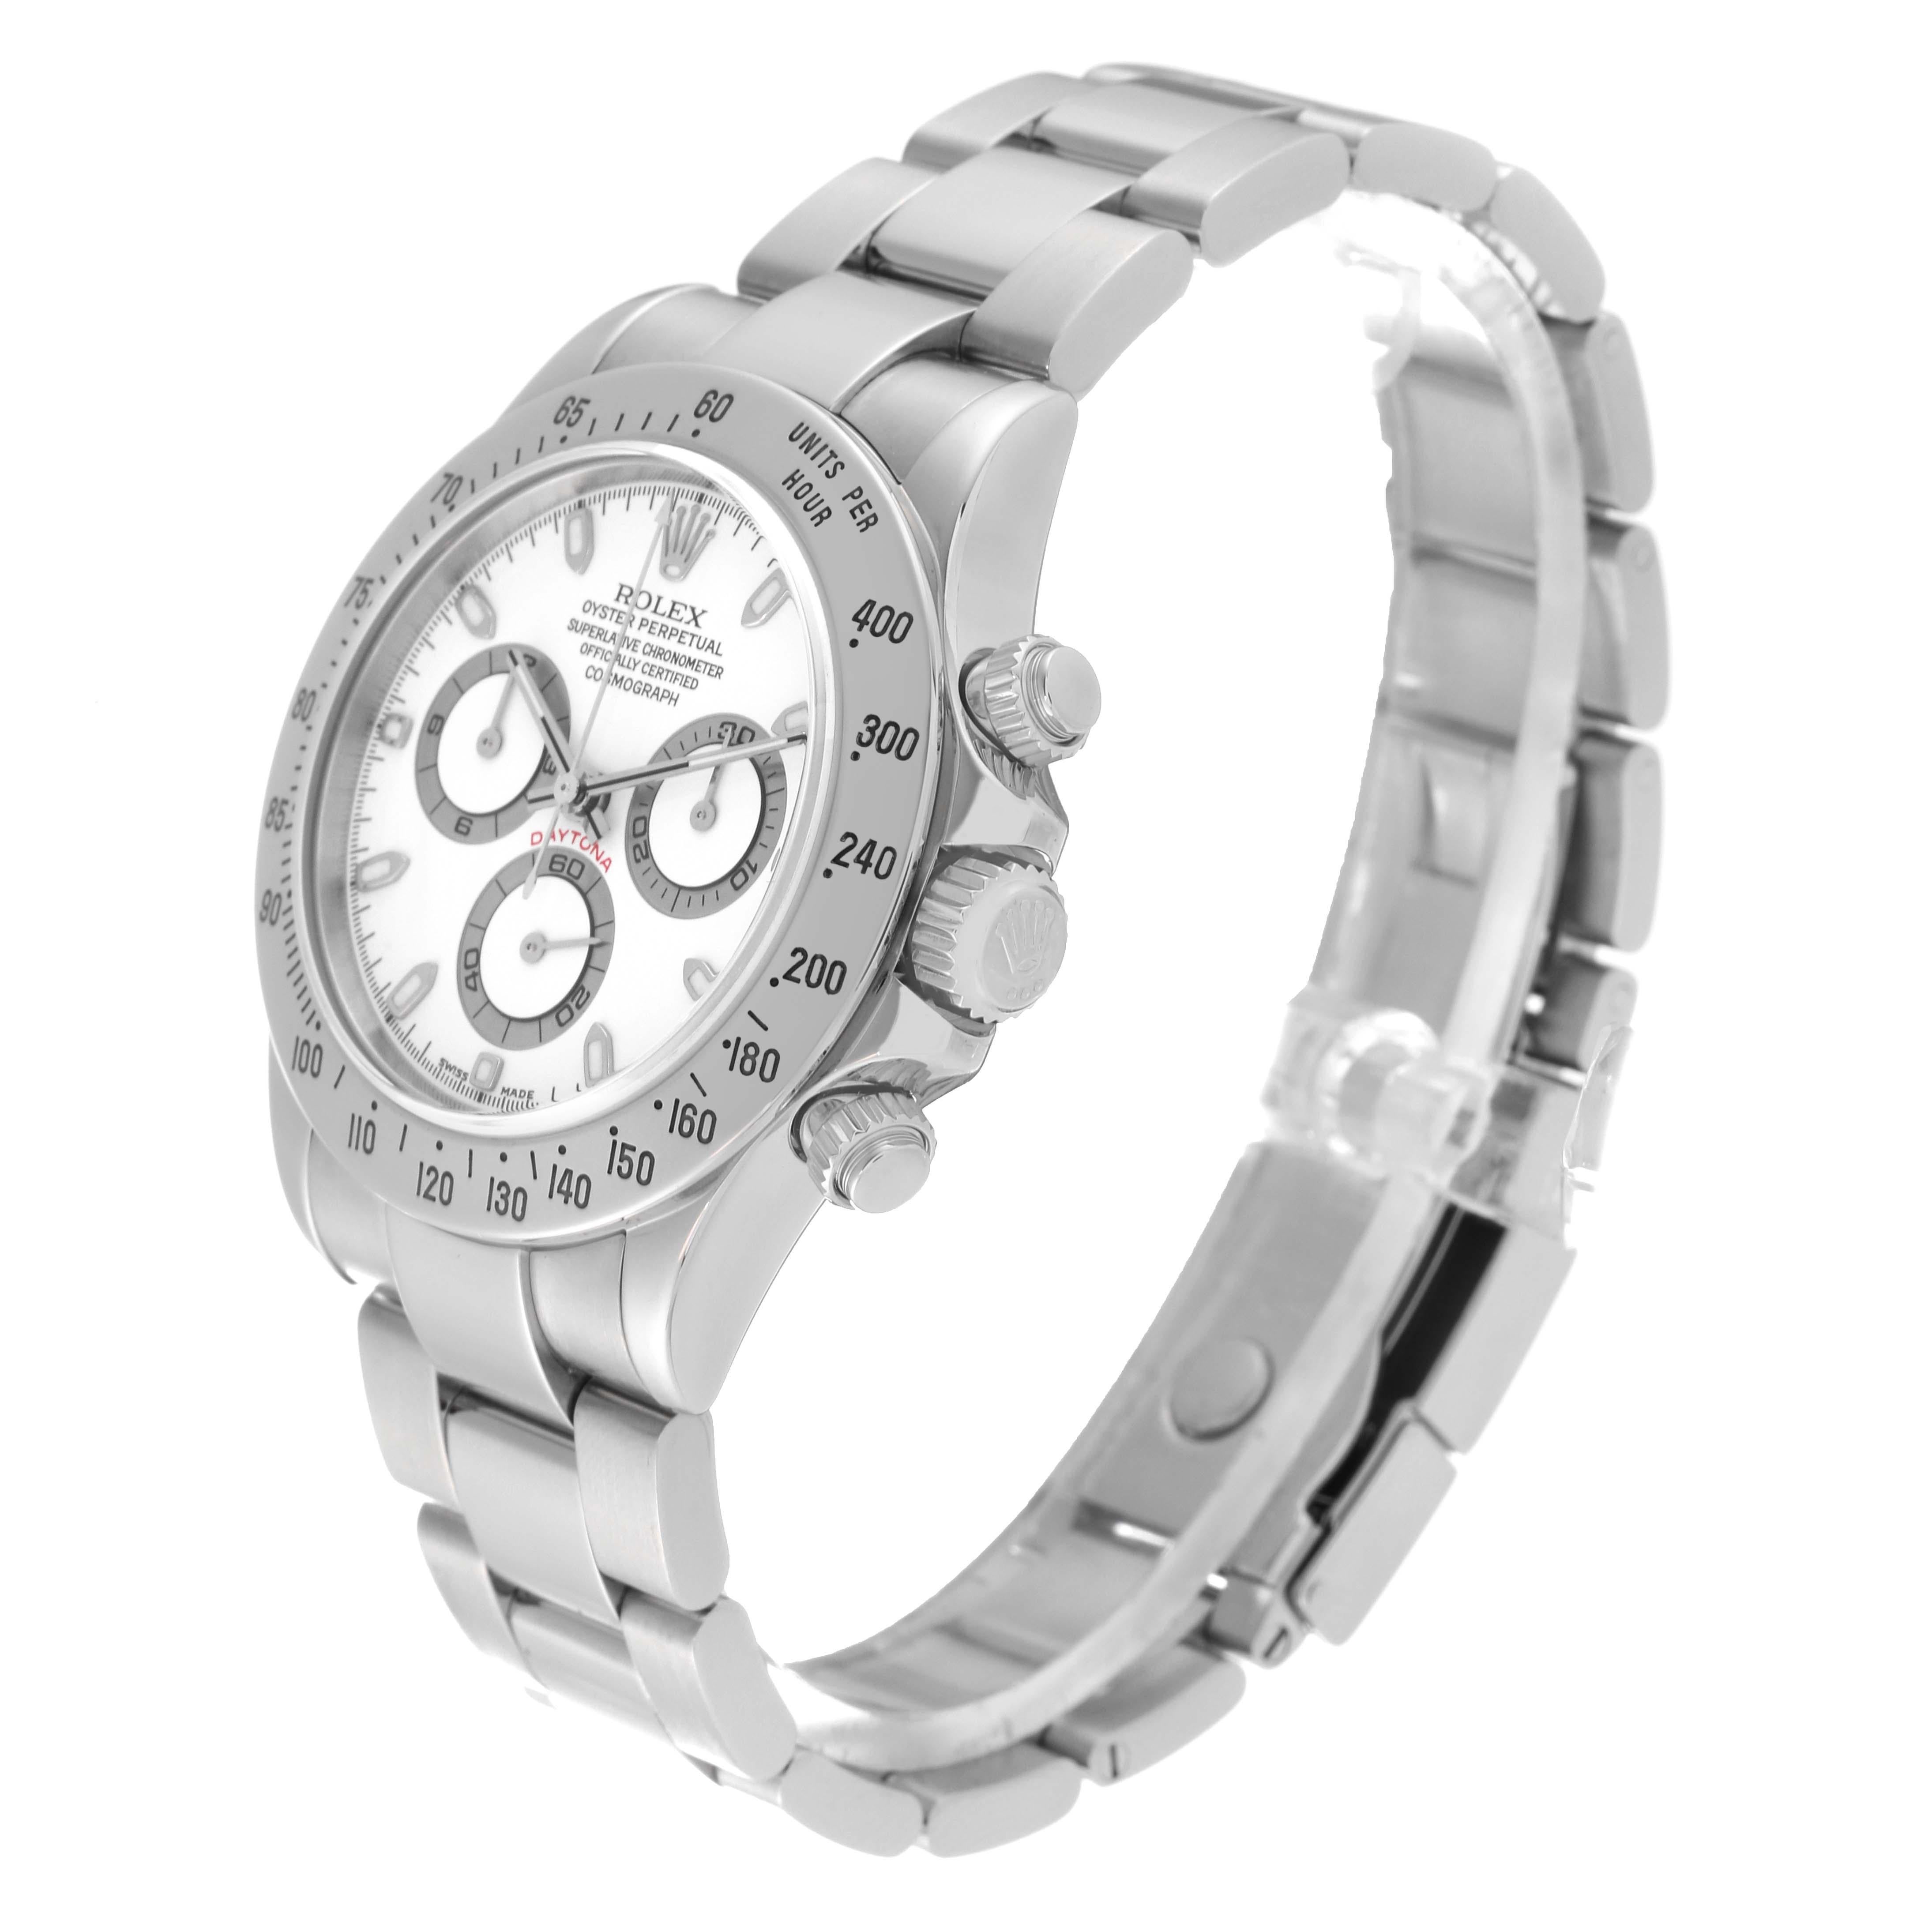 Rolex Daytona White Dial Chronograph Steel Mens Watch 116520 Box Papers For Sale 8